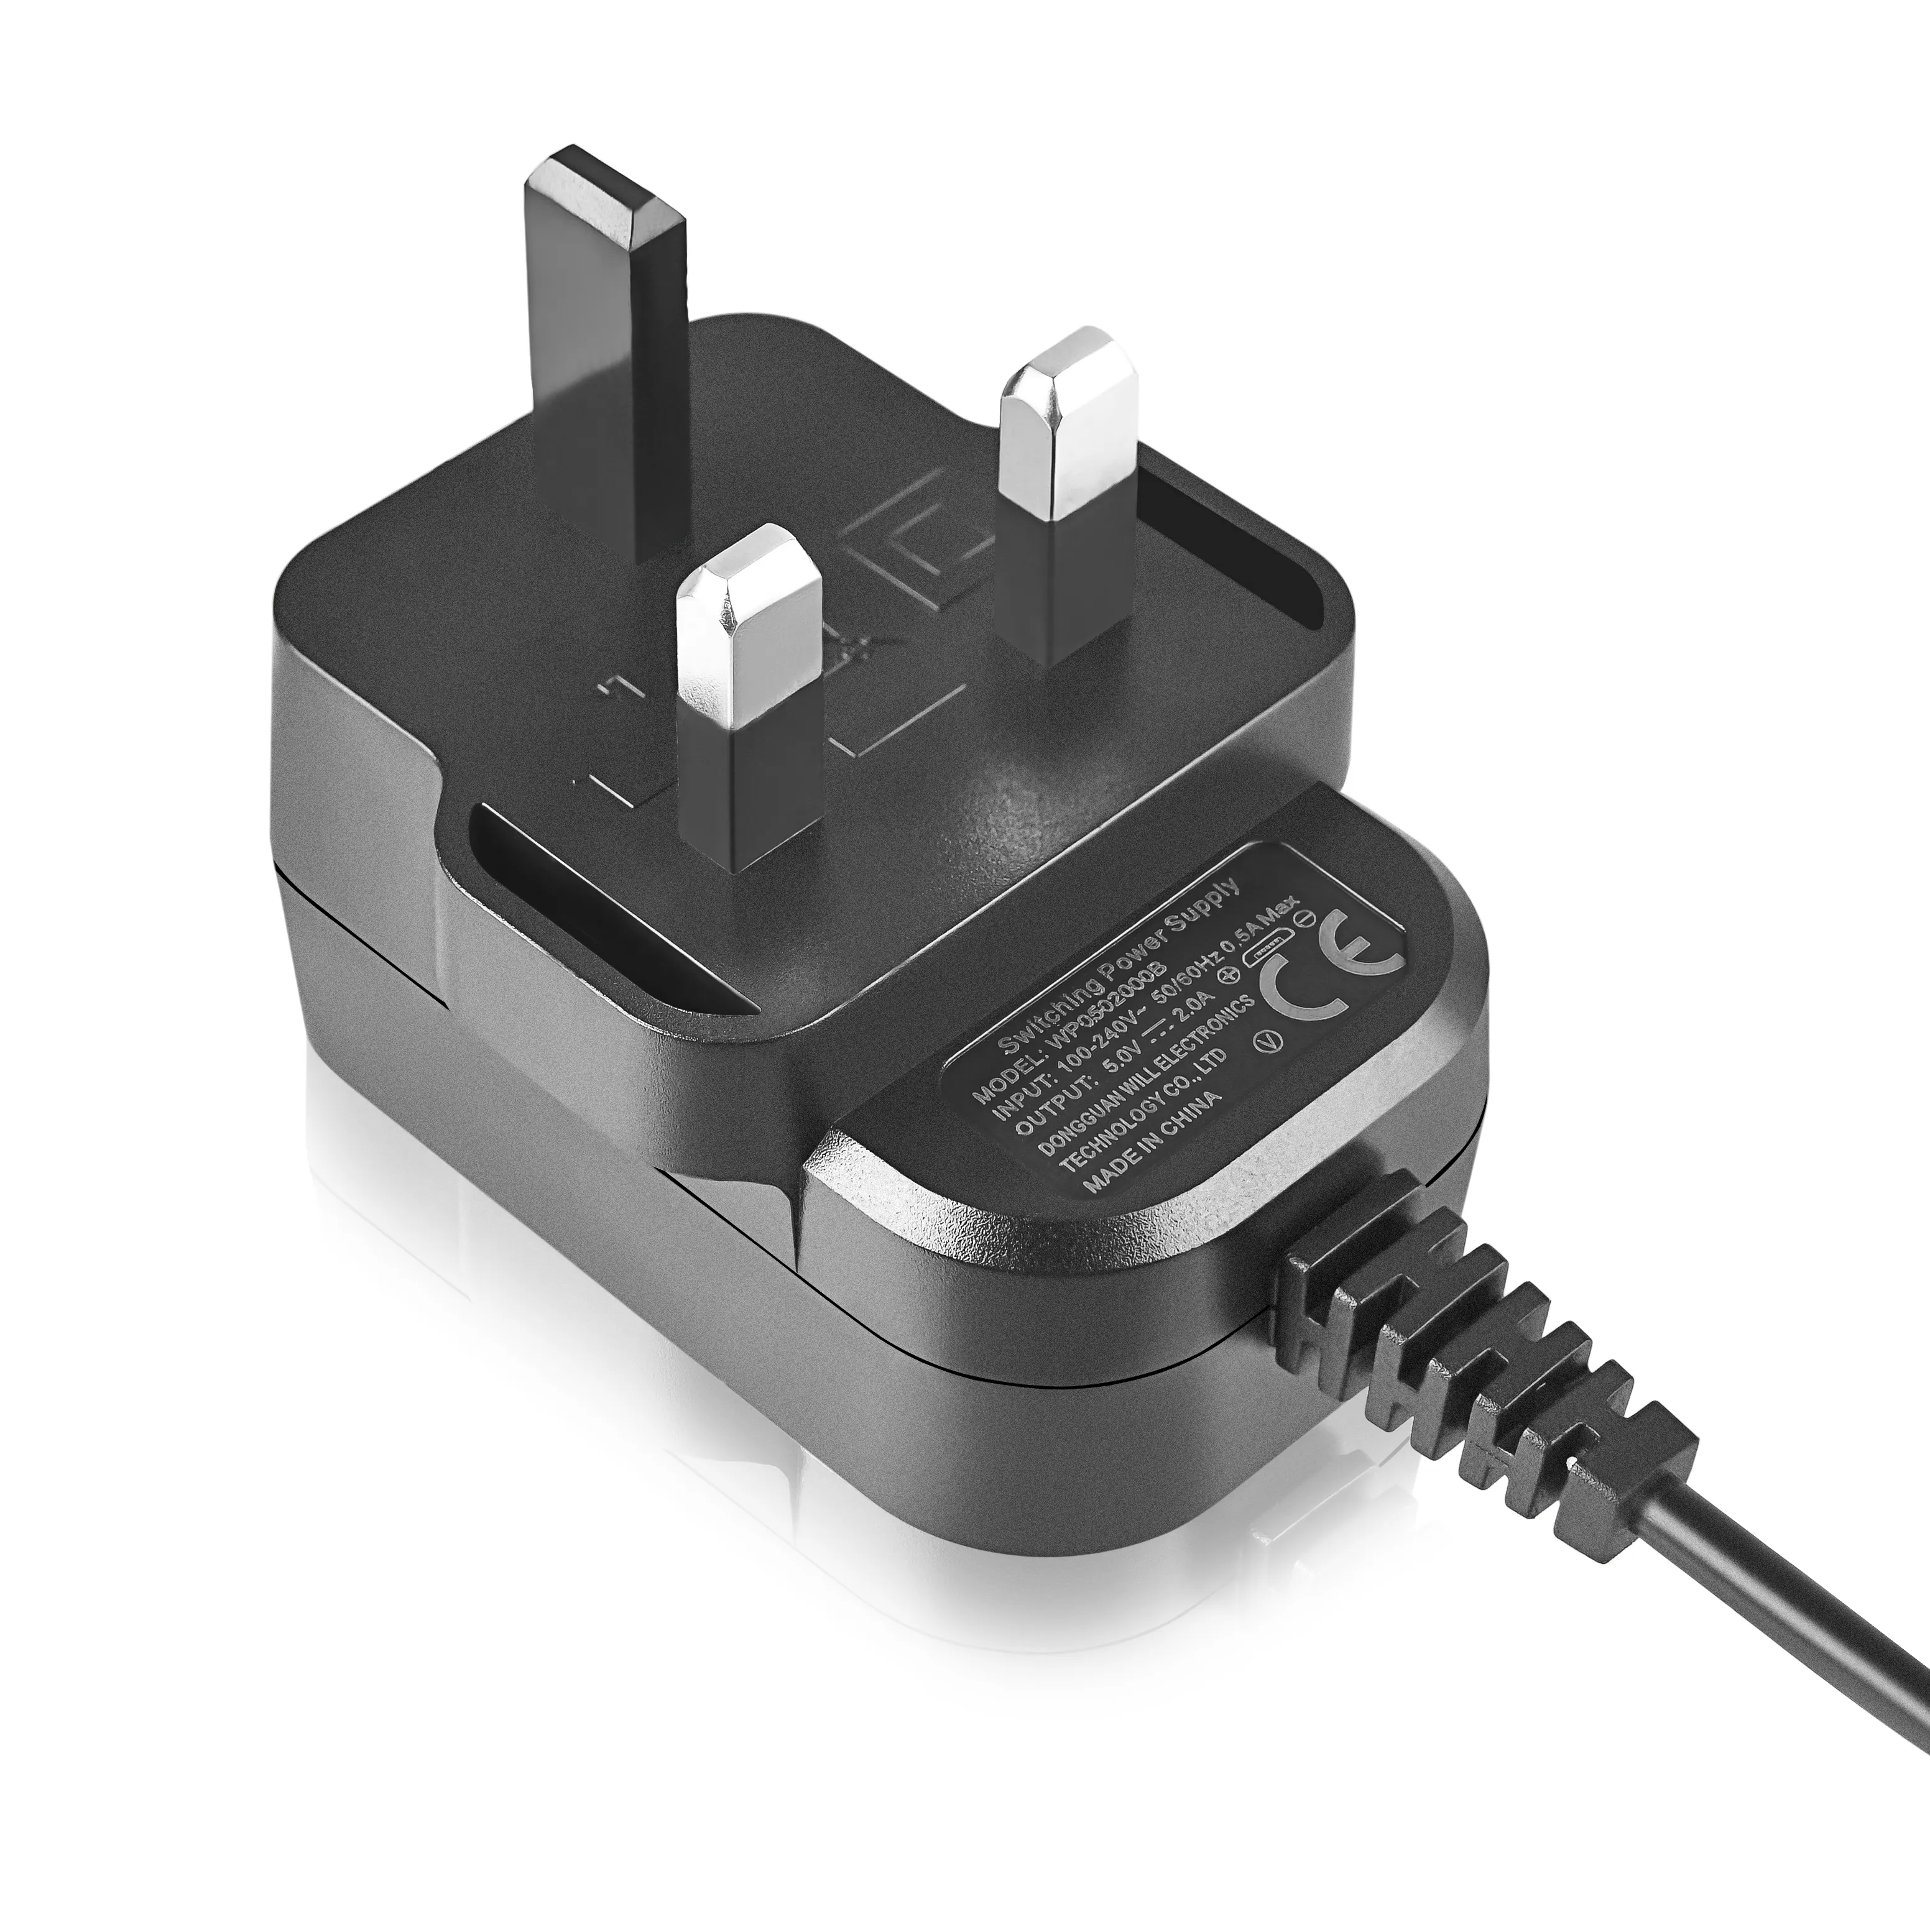 104 9V USB-Ladegerät 15V 18V 500mA UK-Stecker 5V 2A 9V 1A DC-Netzteil 12V 1A AC DC-Adapter